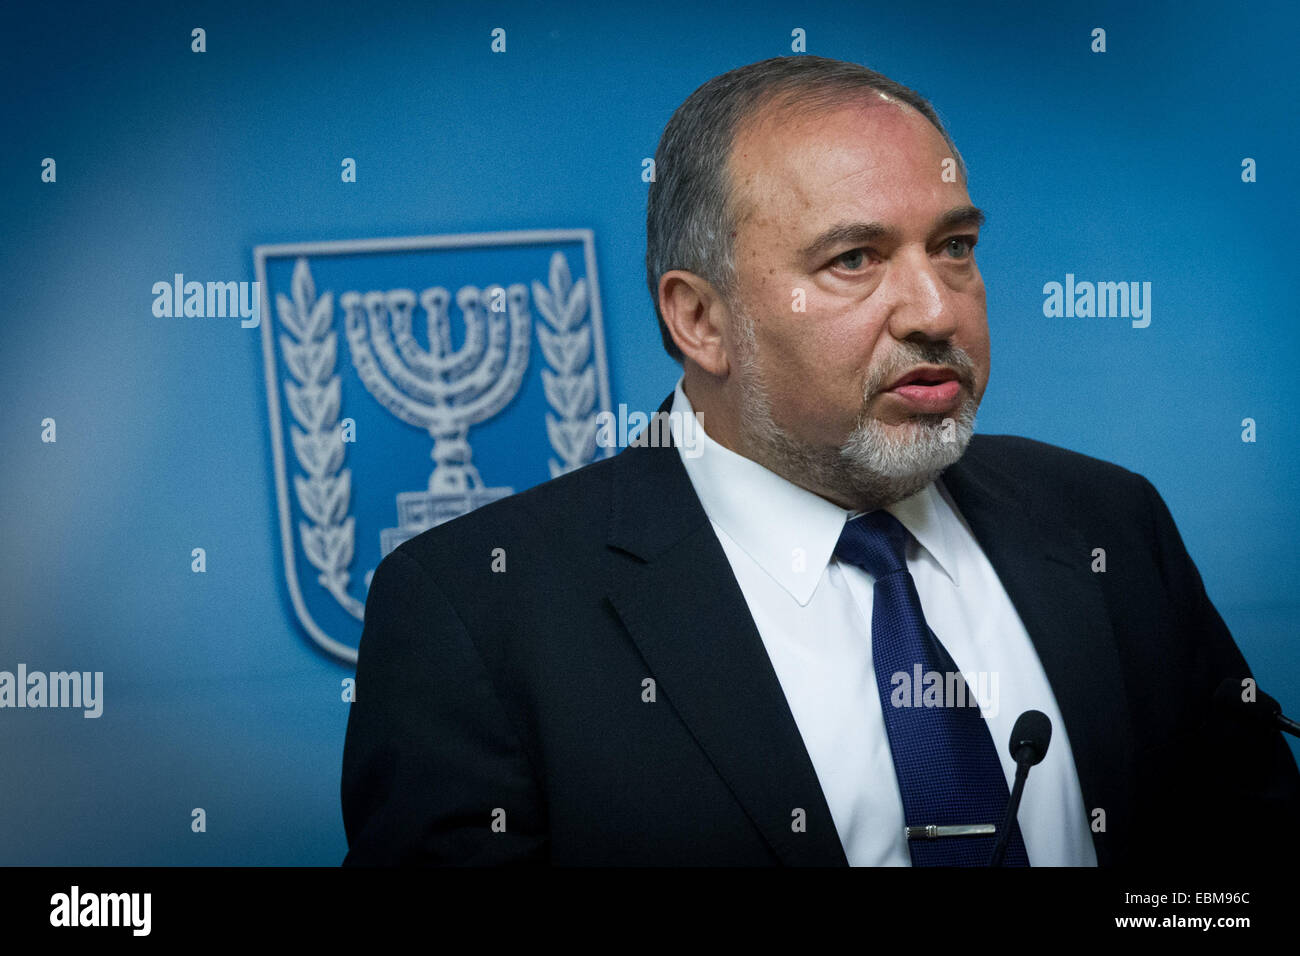 Jerusalem. 2nd Dec, 2014. Avigdor Lieberman, Israeli Foreign Minister and leader of the Israel Beytenu Party, holds a press conference at Israeli Ministry of Foreign Affairs in Jerusalem, on Dec. 2, 2014. Israeli Prime Minister Benjamin Netanyahu announced his support for dispersing the Knesset (parliament) and conducting early elections amid a coalition crisis. During a press conference at his Jerusalem office, Netanyahu also said he has ordered to fire Justice Minister Tzipi Livni and Finance Minister Yair Lapid Credit:  JINI/Xinhua/Alamy Live News Stock Photo